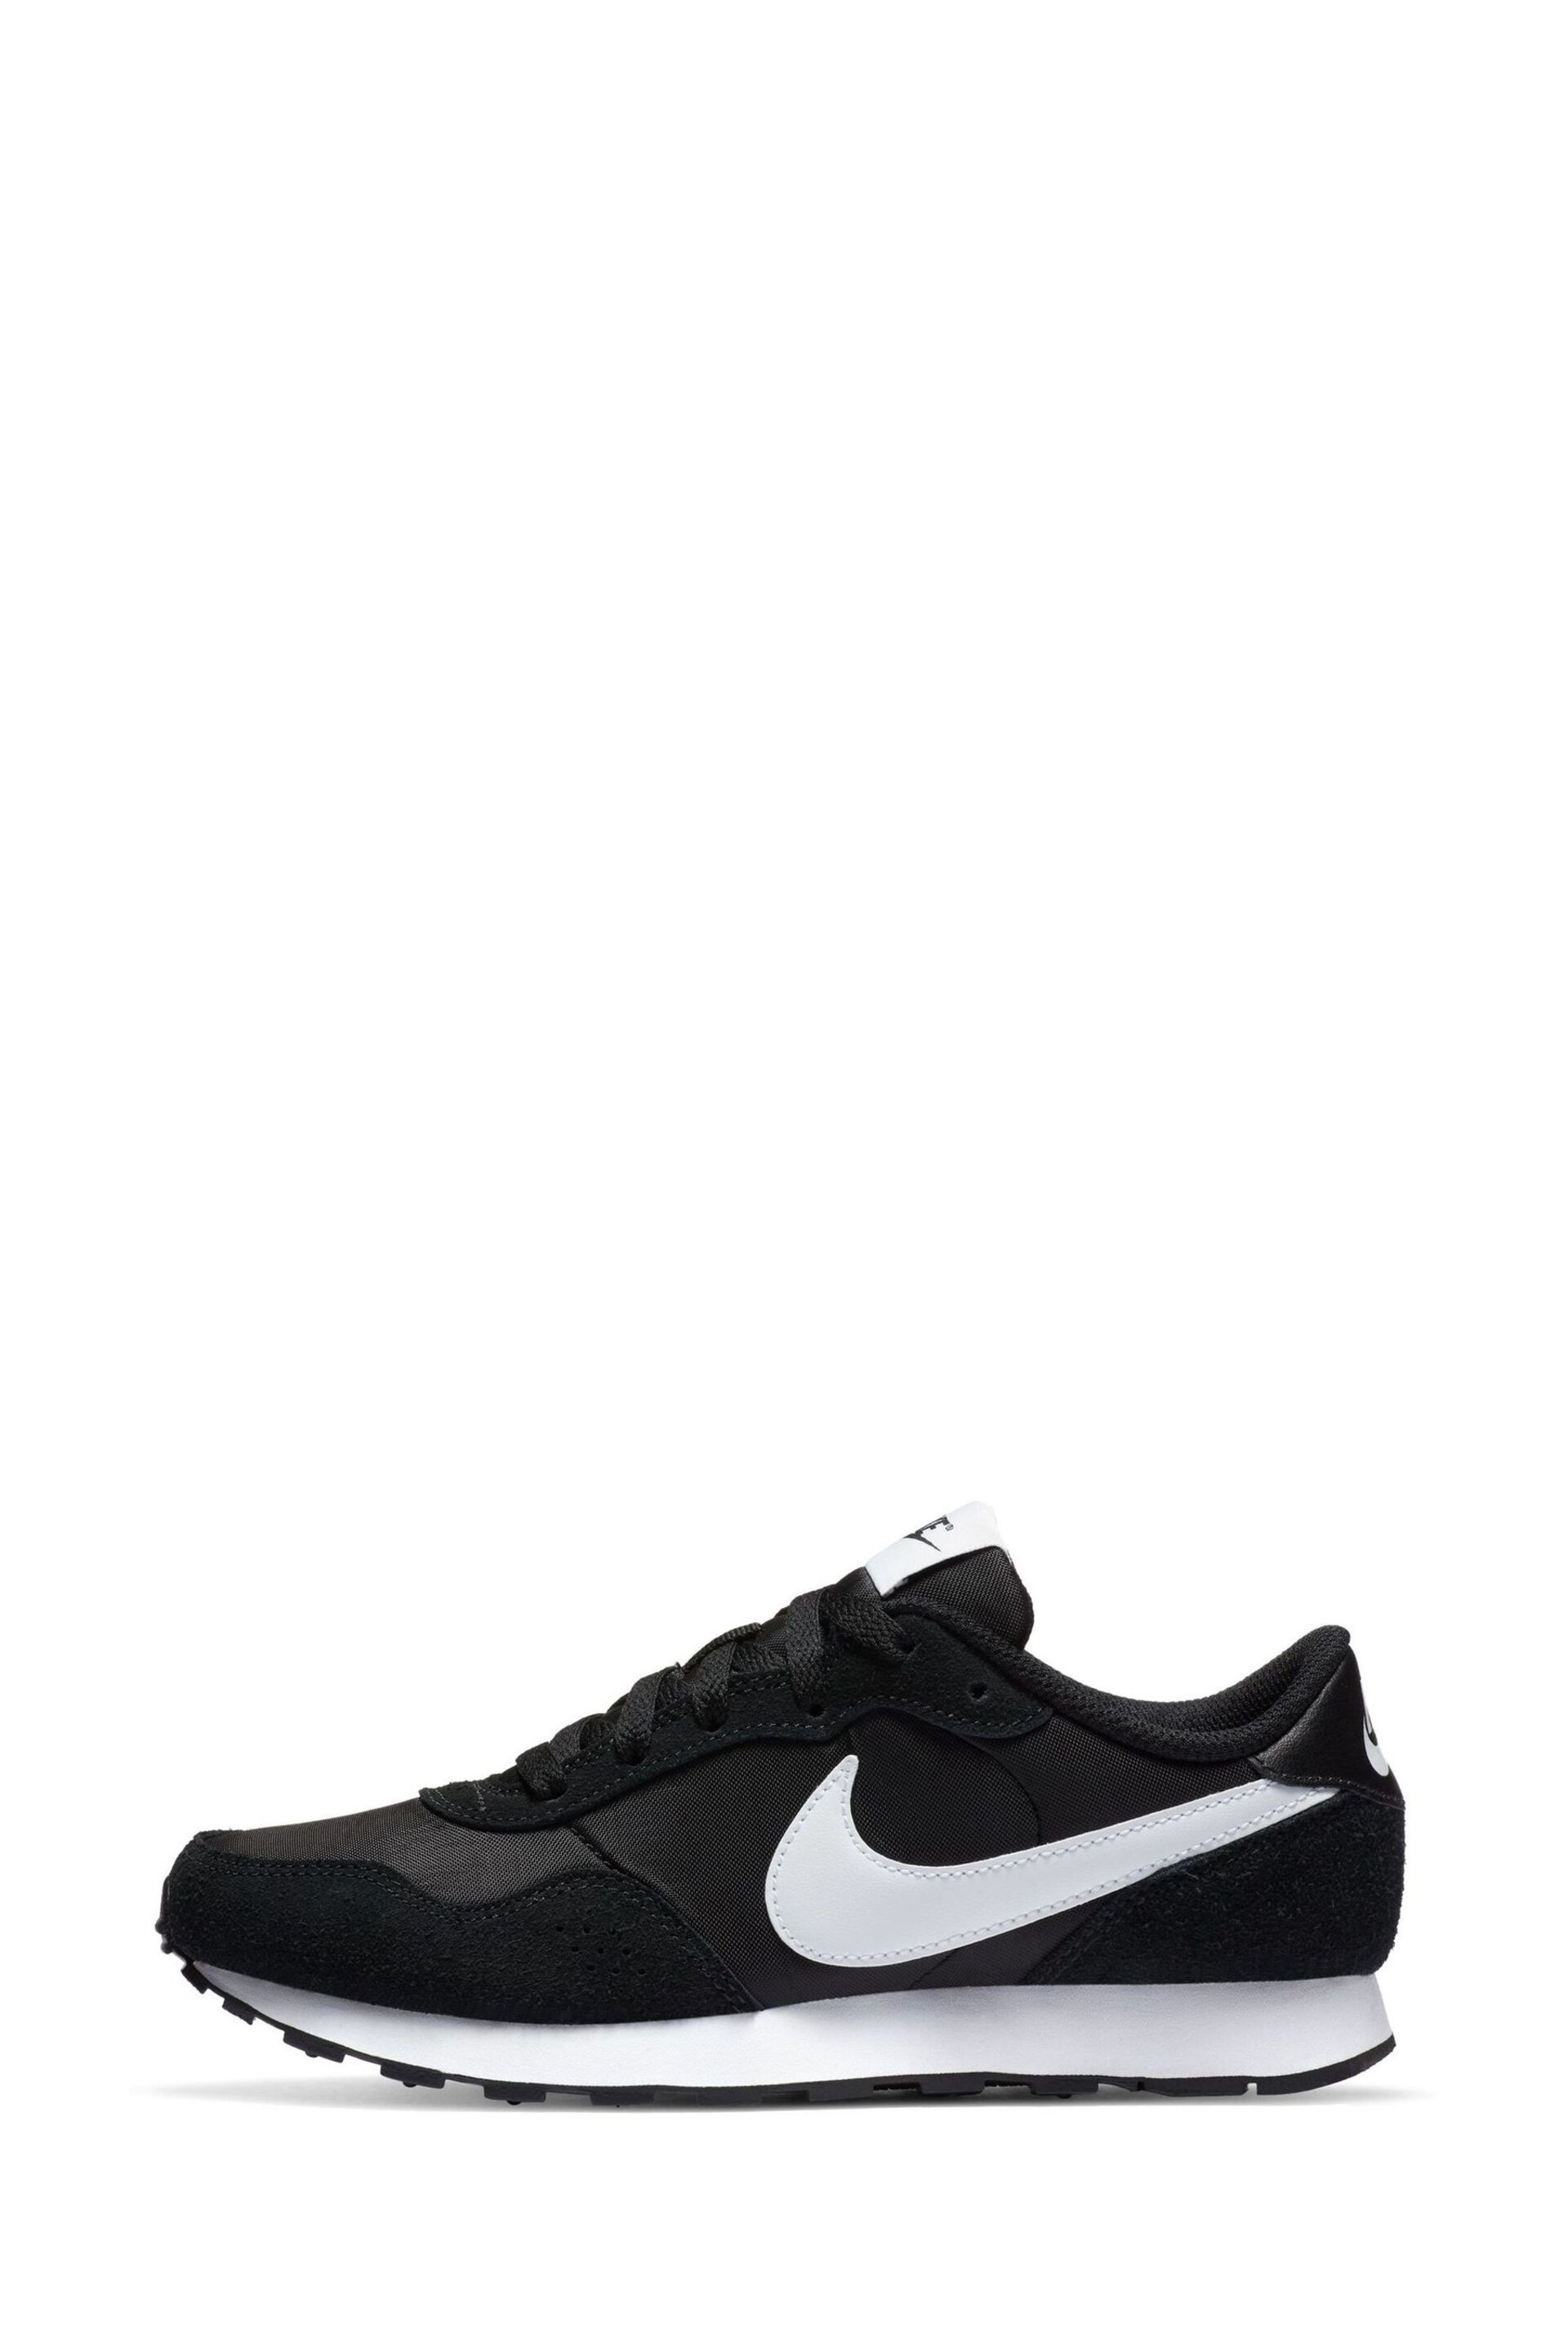 Nike Black/White Youth MD Valiant Trainers - Image 4 of 10